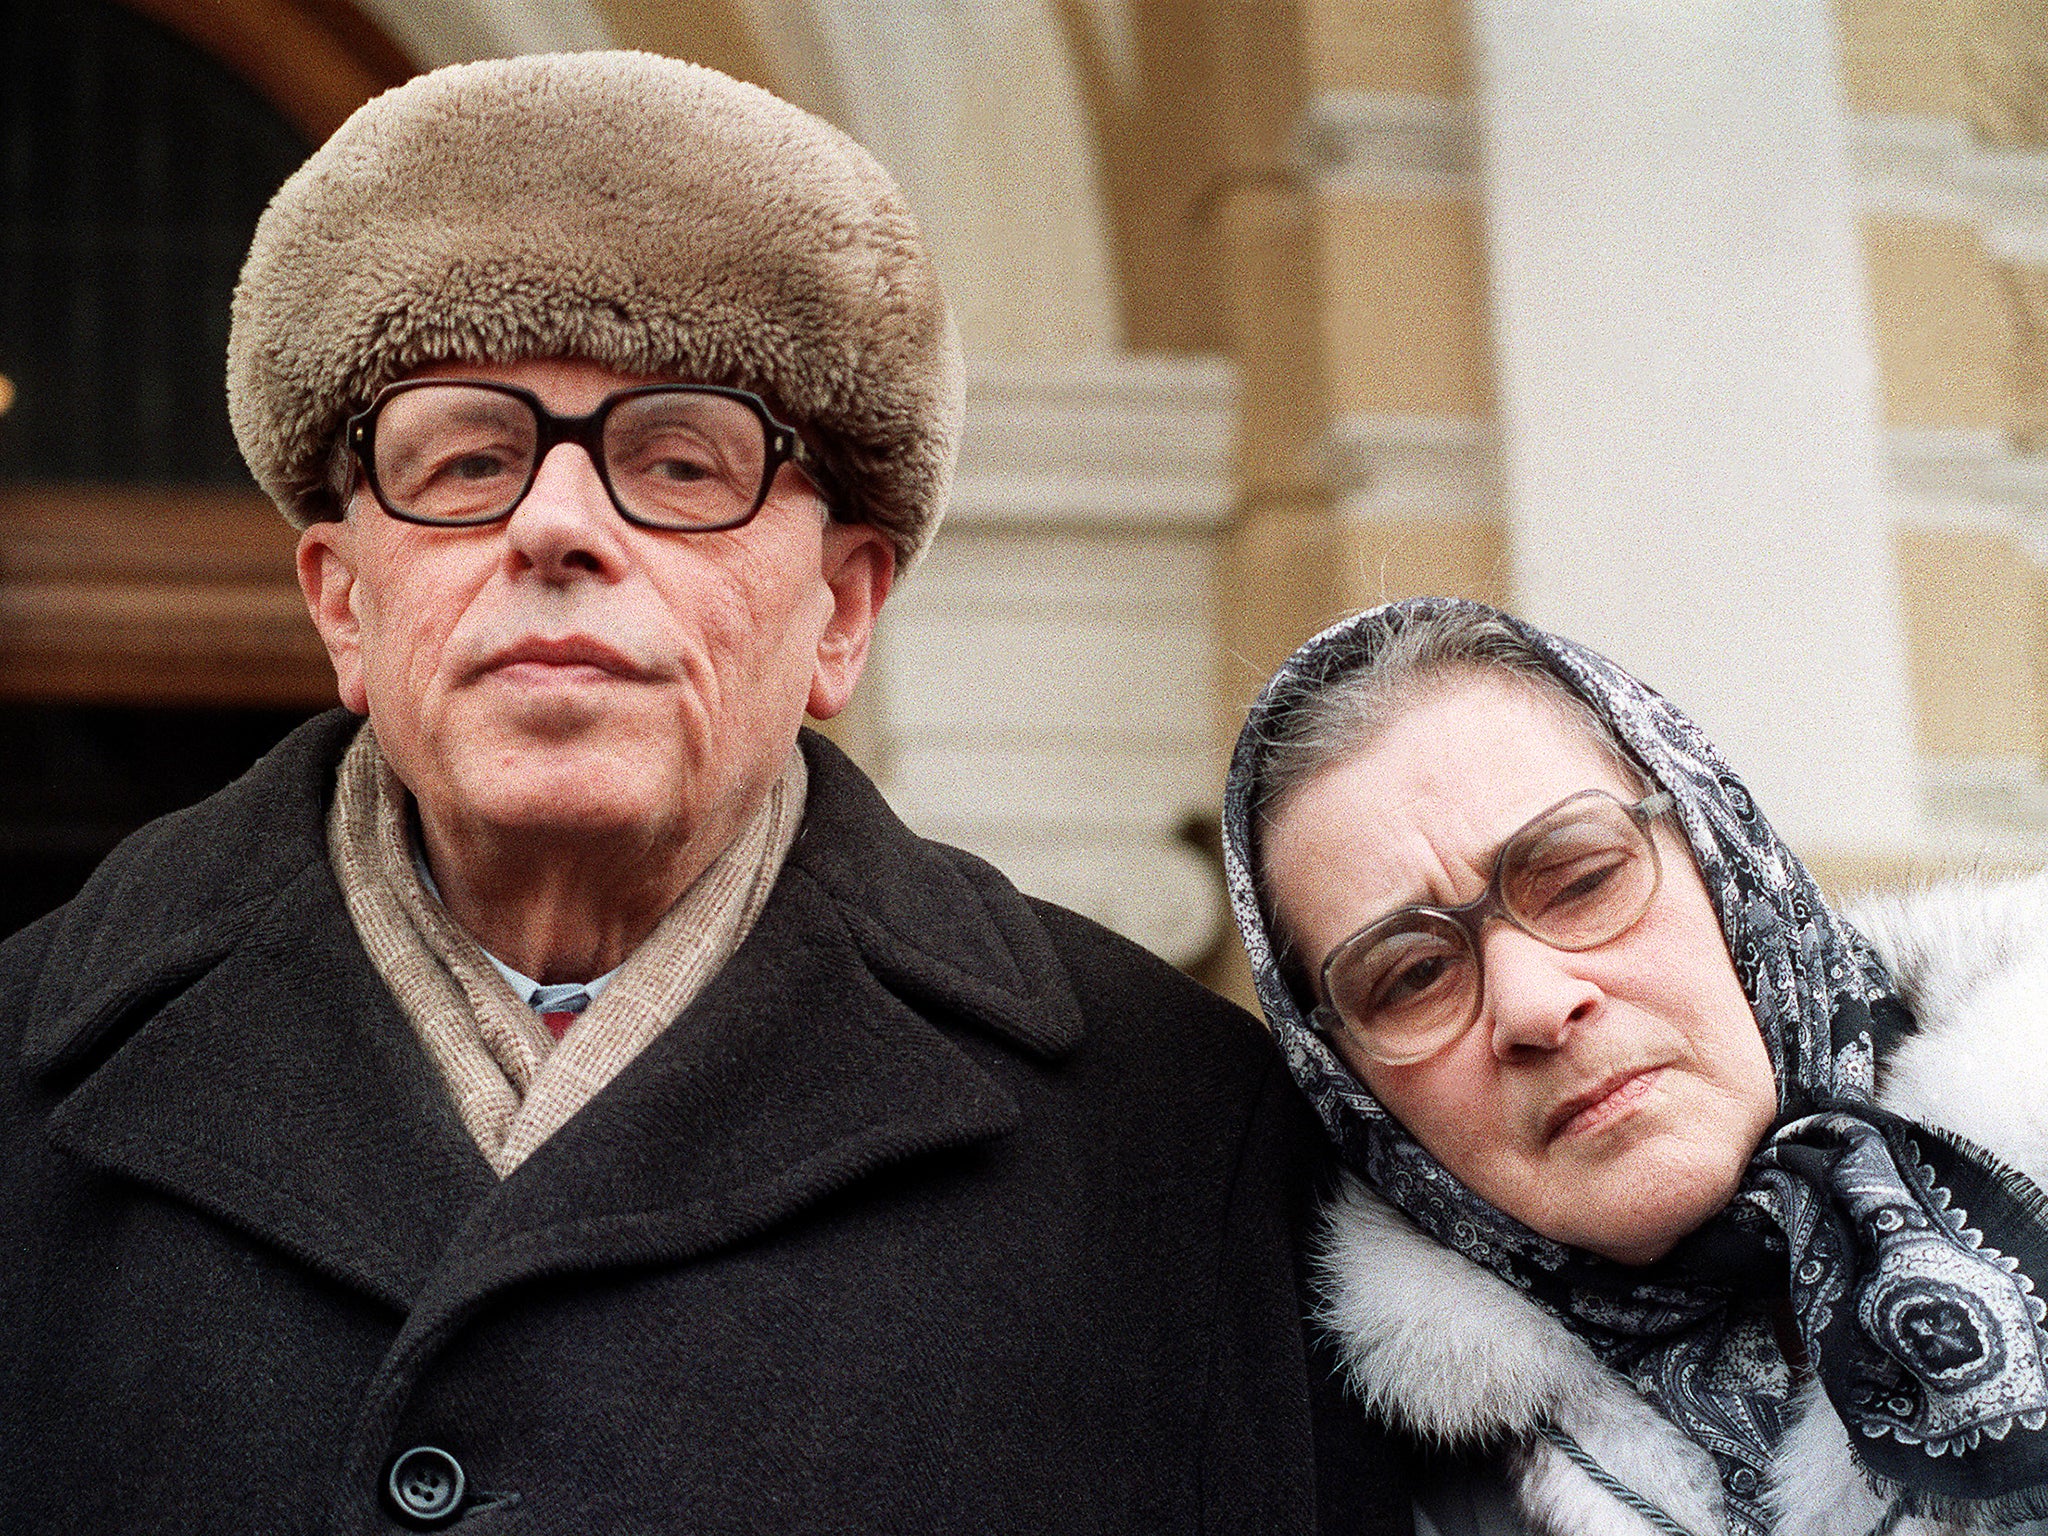 Dissident Russian physicist Andrei Sakharov and his wife Yelena Bonner. As part of the process of glasnost, Gorbachev granted him permission for him to return to the country (Getty)